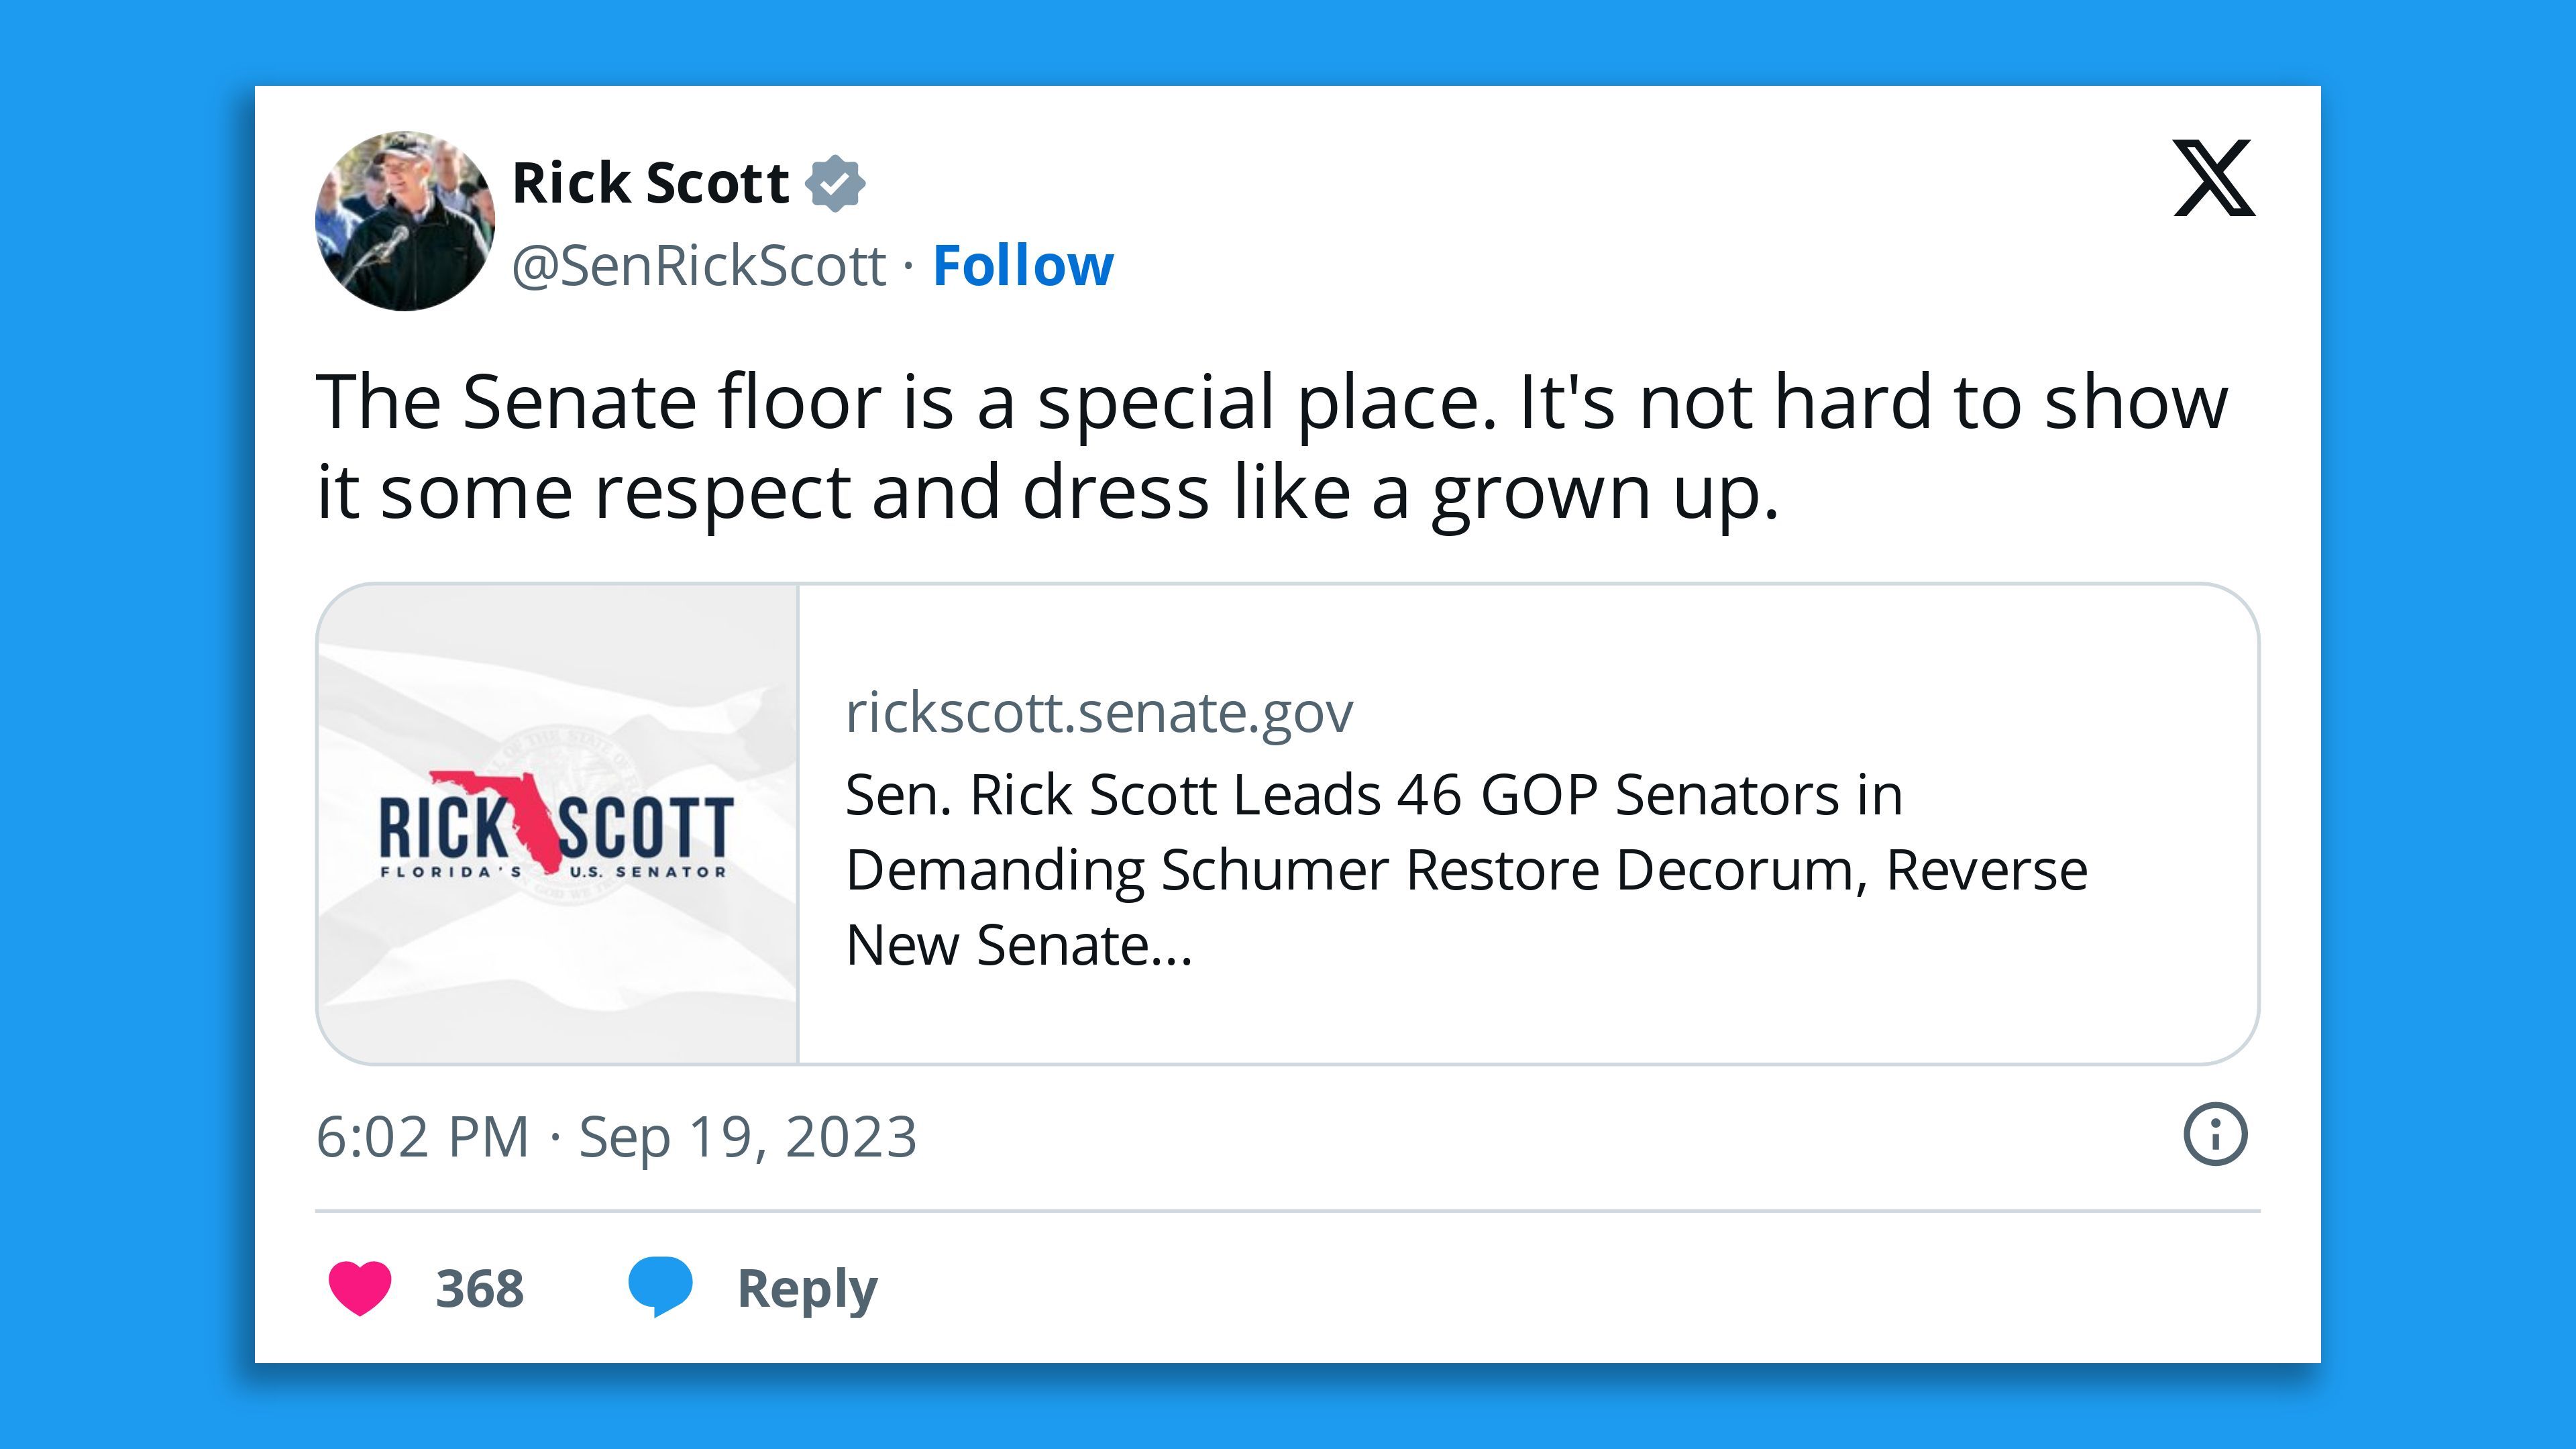 A screenshot of a tweet by Sen. Rick Scott, saying: "The Senate floor is a special place. It's not hard to show it some respect and dress like a grown up."